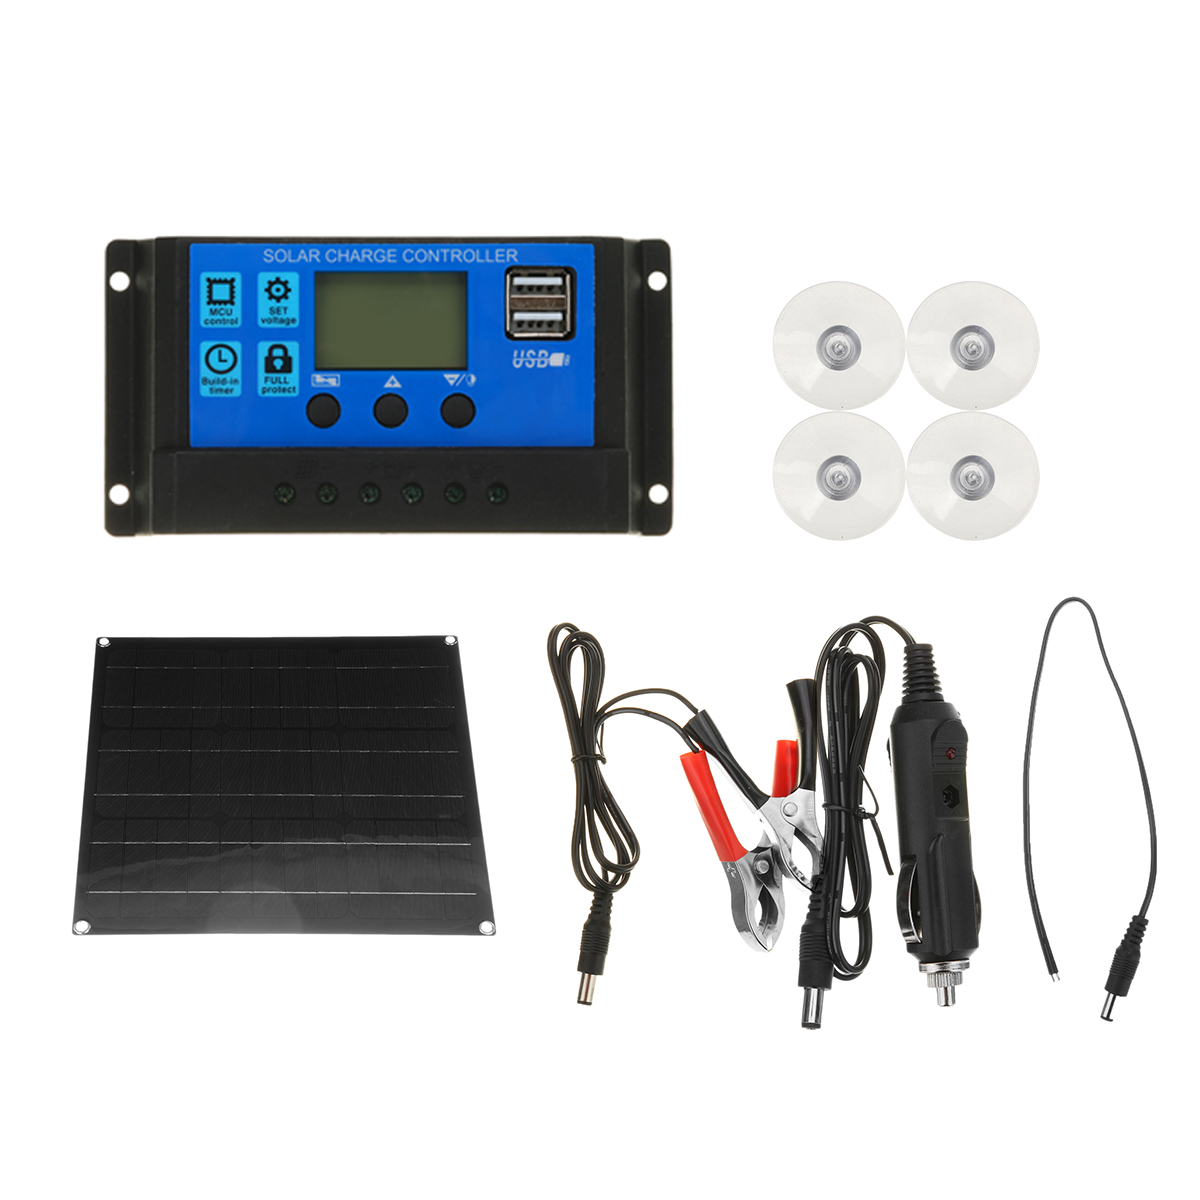 30-90A-Solar-Panel-Kit-Dual-USB-Port-Battery-Charger-LCD-Controller-With-4Pcs-Suckers-1848021-3